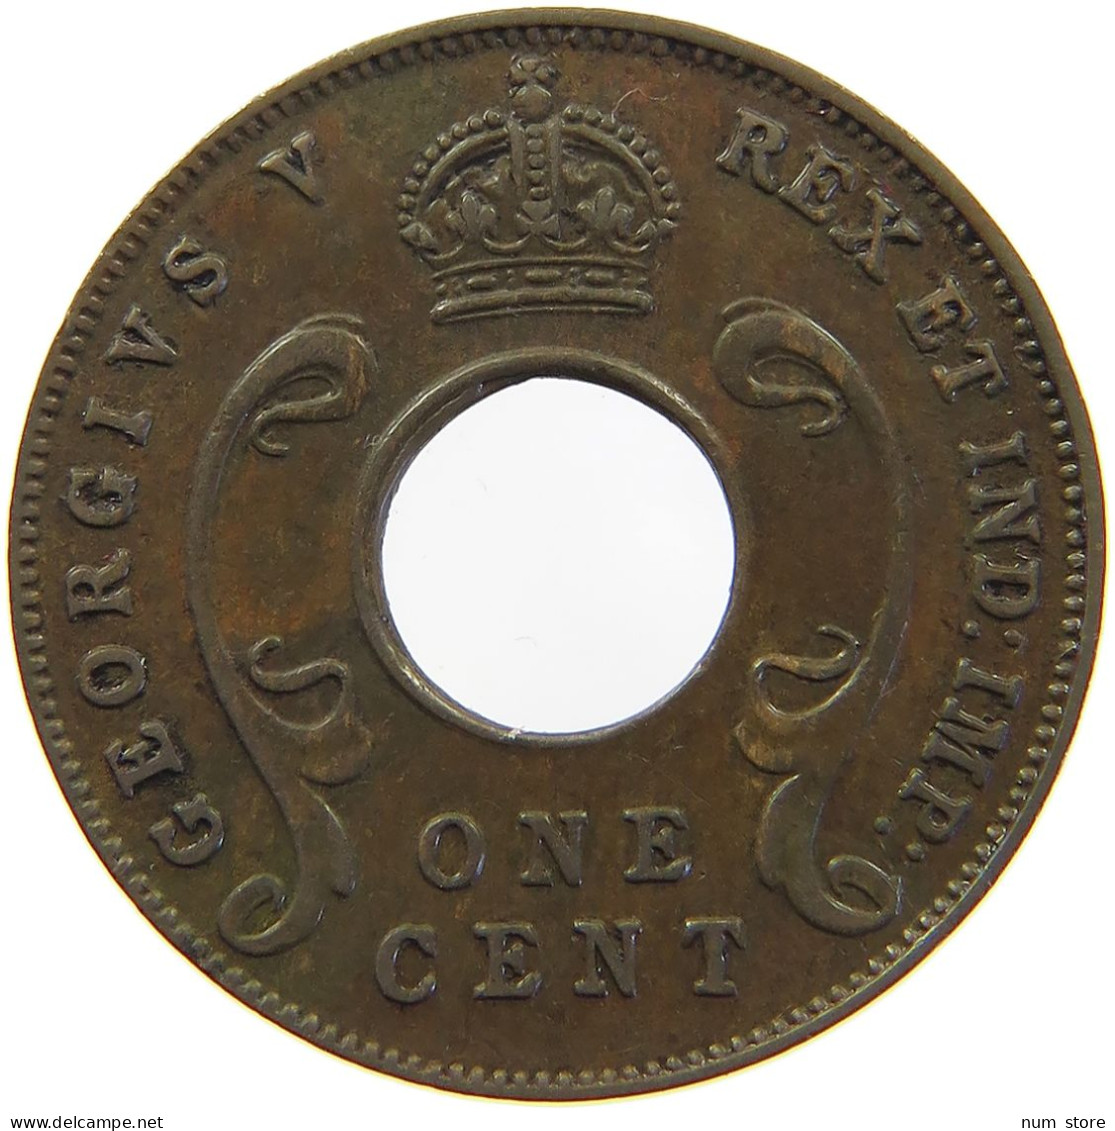 EAST AFRICA CENT 1930 GEORGE V. (1910-1936) #MA 065540 - British Colony